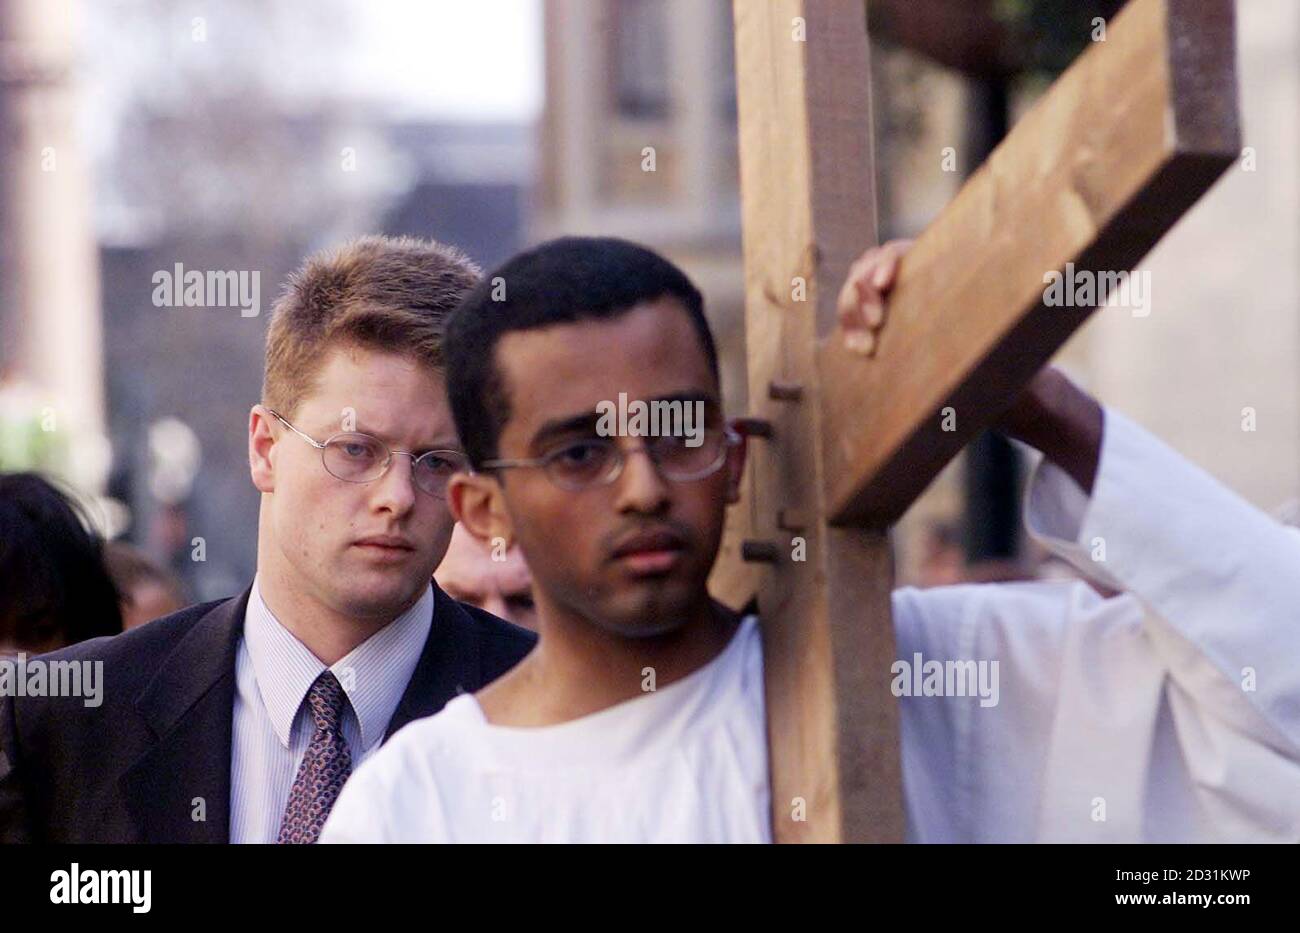 28-year-old human rights campaigner James Mawdsley (left) freed in October from a Burmese prison after serving 14 months of a 17-year prison sentence for distributing pro-democracy leaflets, at a Good Friday re-enactment of Christ's crucifixion.  *... with A-level student Yohannes Hailelul, 18, from St Charles Catholic Sixth Form College, west London. It is the 10th year the ecumenical ceremony has taken place and was raising money for The Passage, a homelessness shelter, and Jubilee Campaign, a human rights organisation which has worked with Mr Mawdsley.  Stock Photo